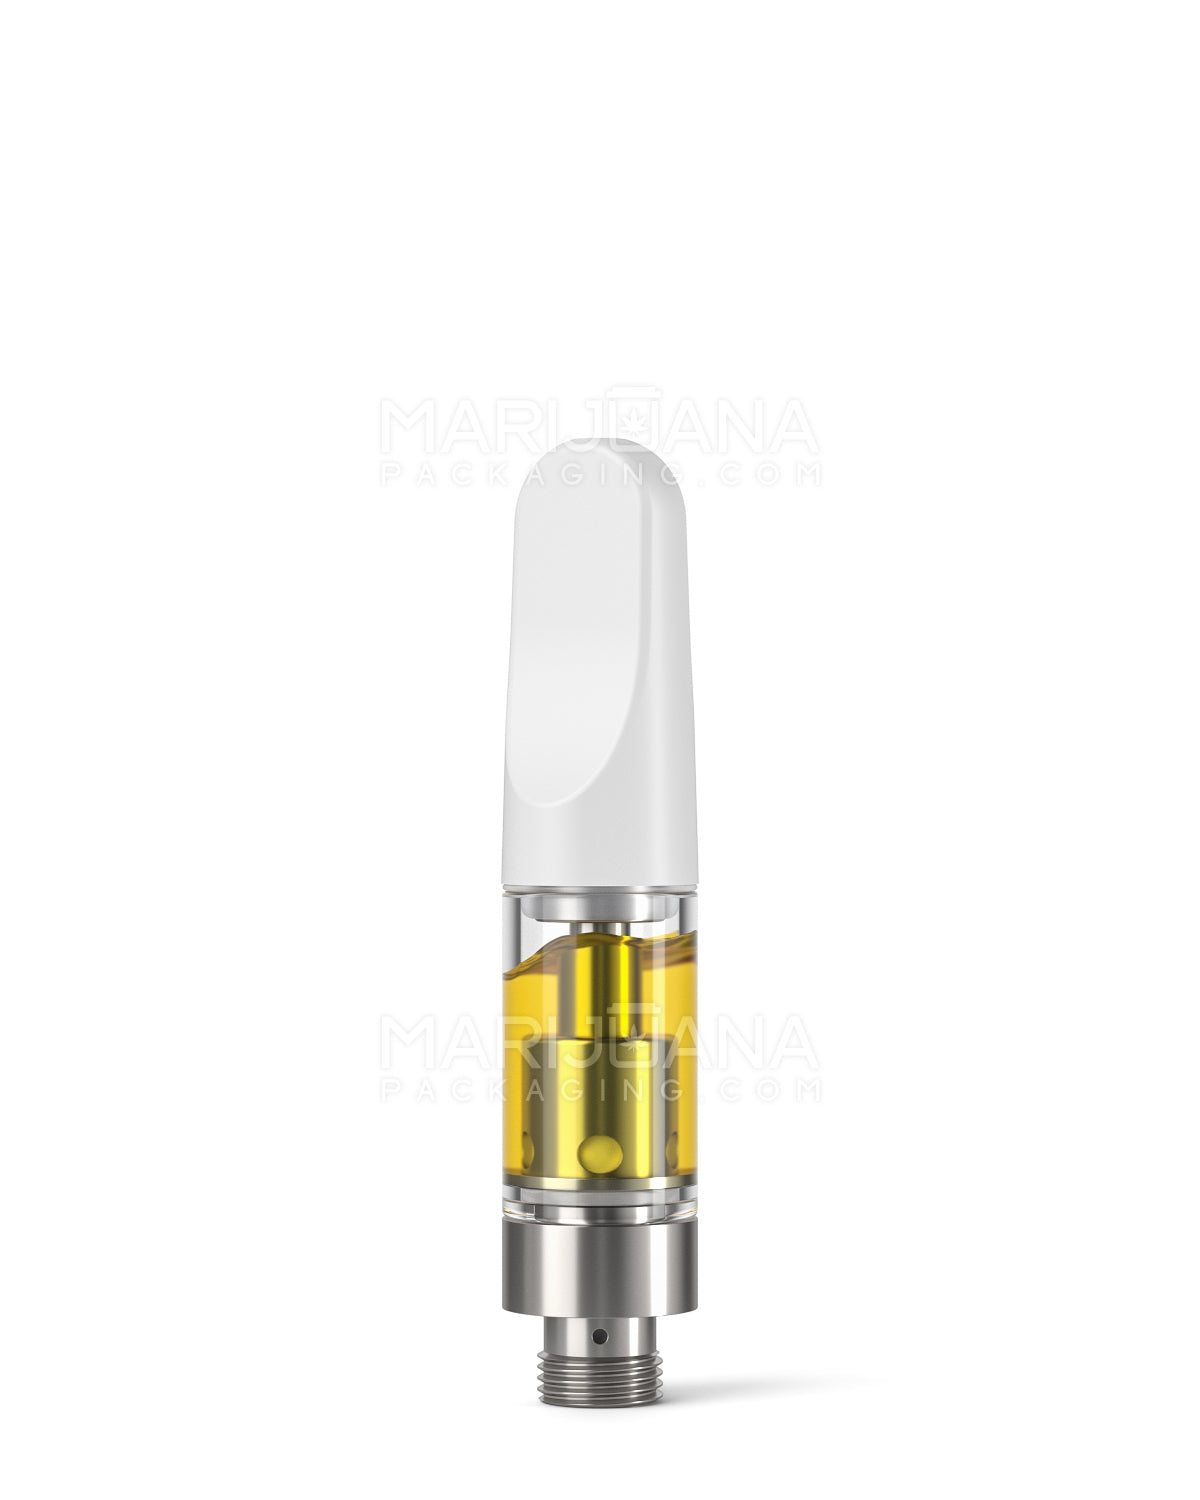 CCELL | Liquid6 Reactor Glass Vape Cartridge with White Plastic Mouthpiece | 0.5mL - Screw On - 100 Count - 2